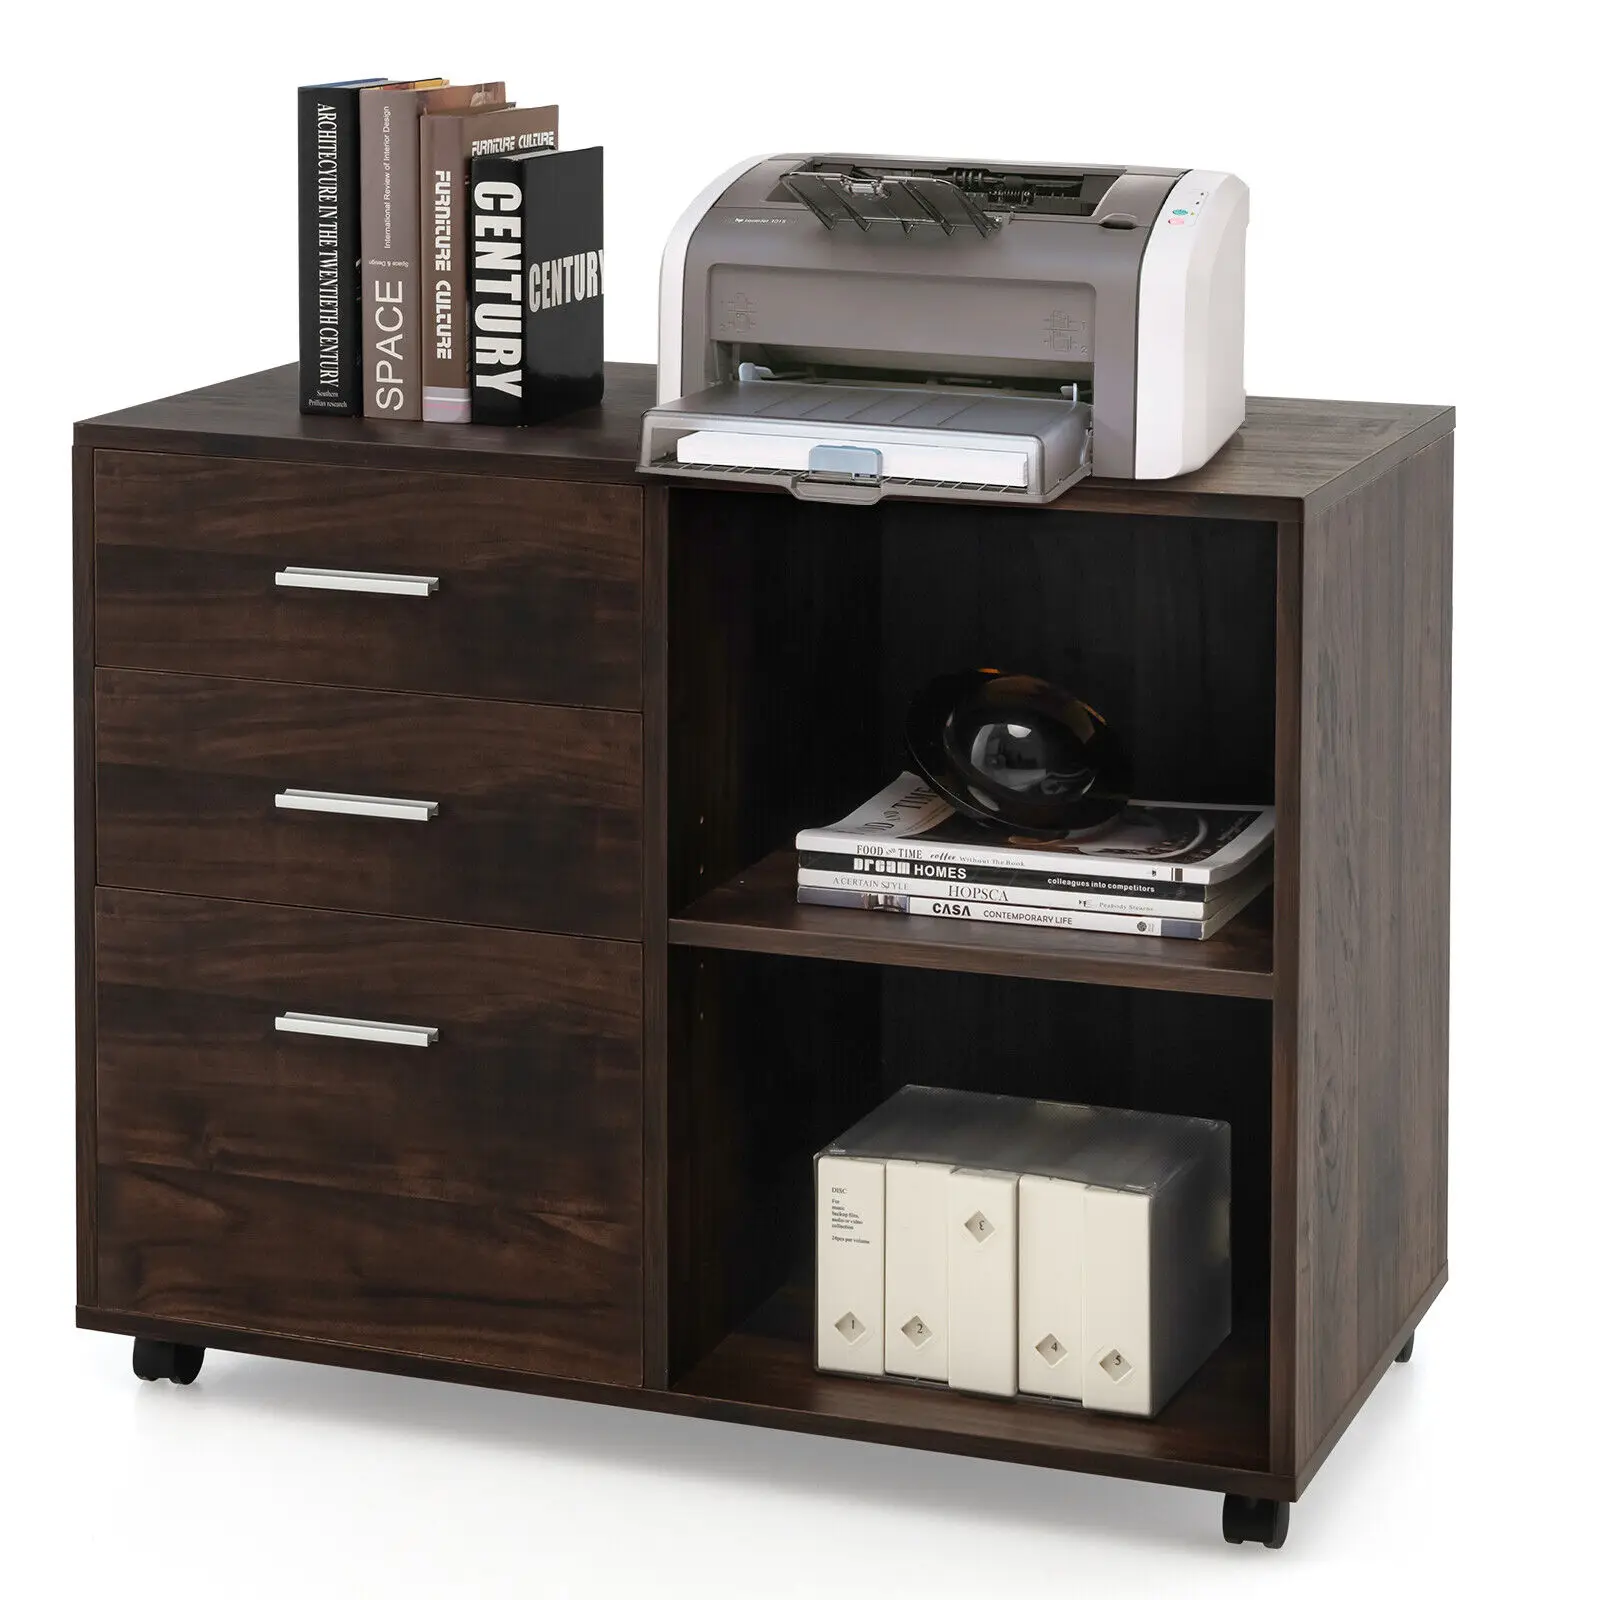 Costway 3-Drawer Wood File Cabinet Mobile Lateral Printer Stand w/Open Storage Shelves